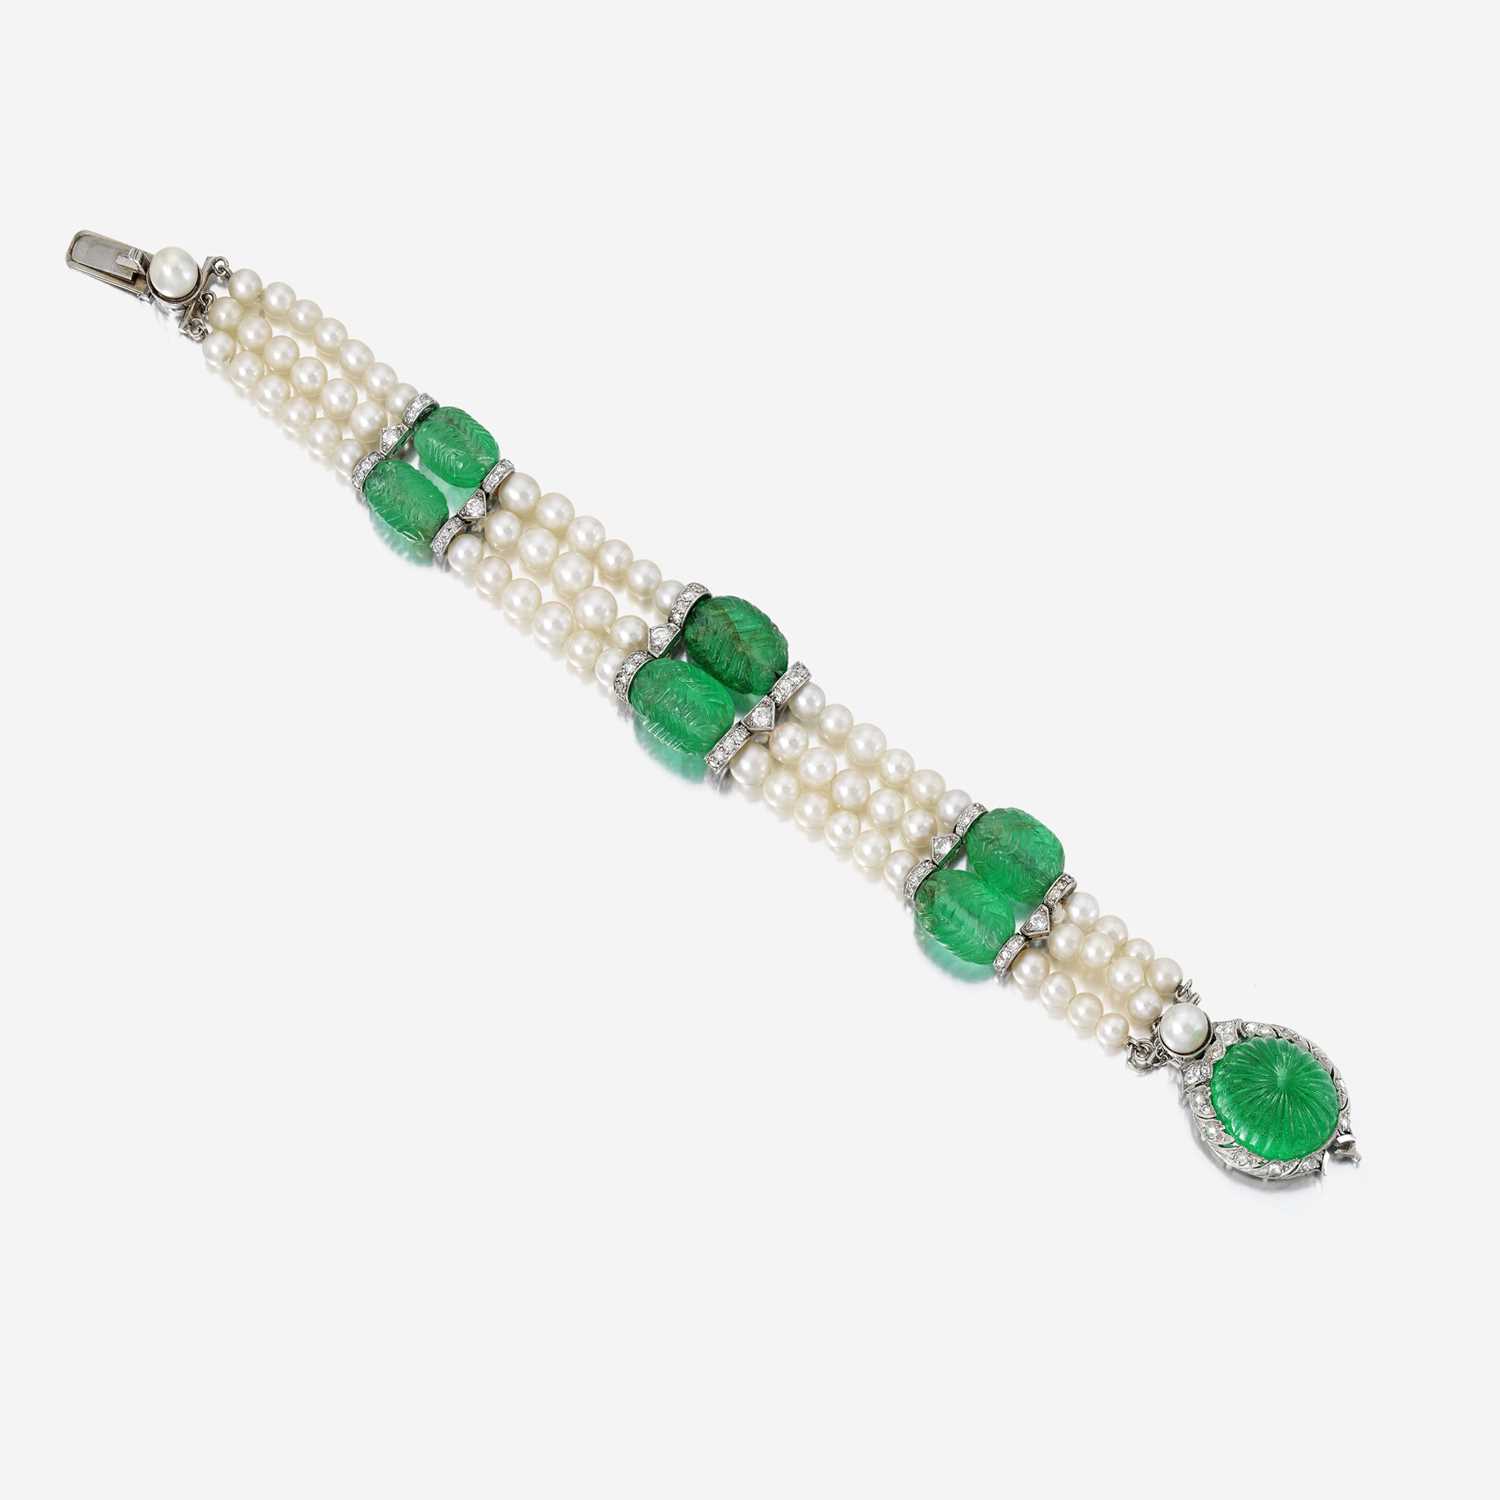 Lot 137 - An Art Deco carved emerald, pearl, and diamond bracelet